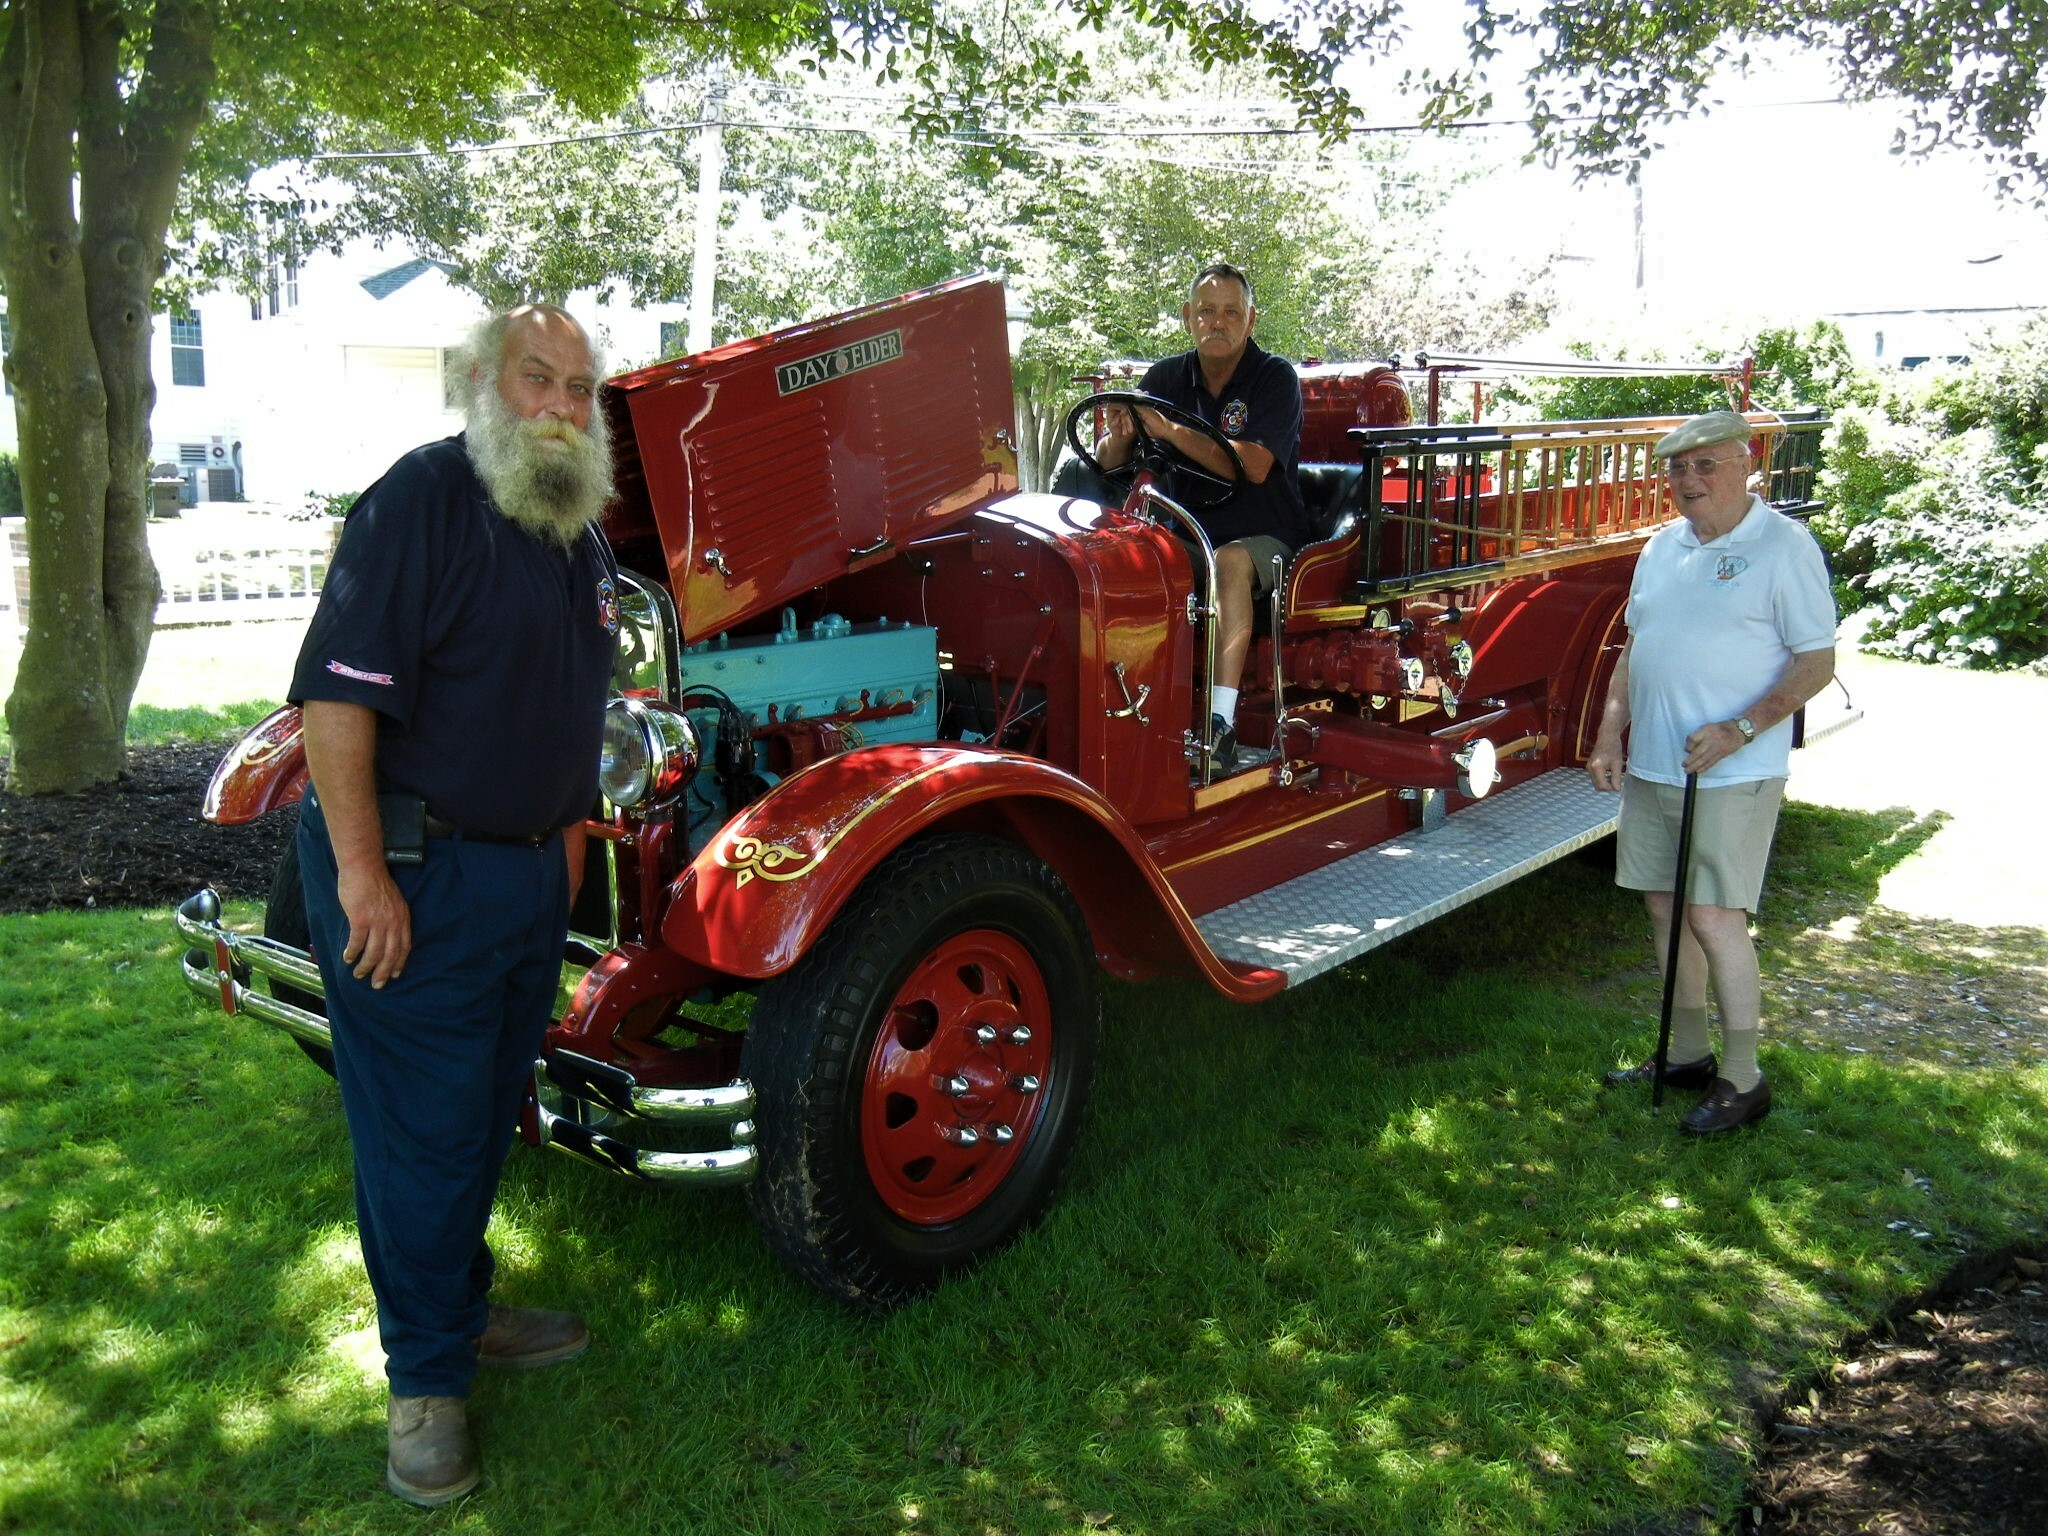 Volunteers with one of the antique fire trucks on display in 2018.